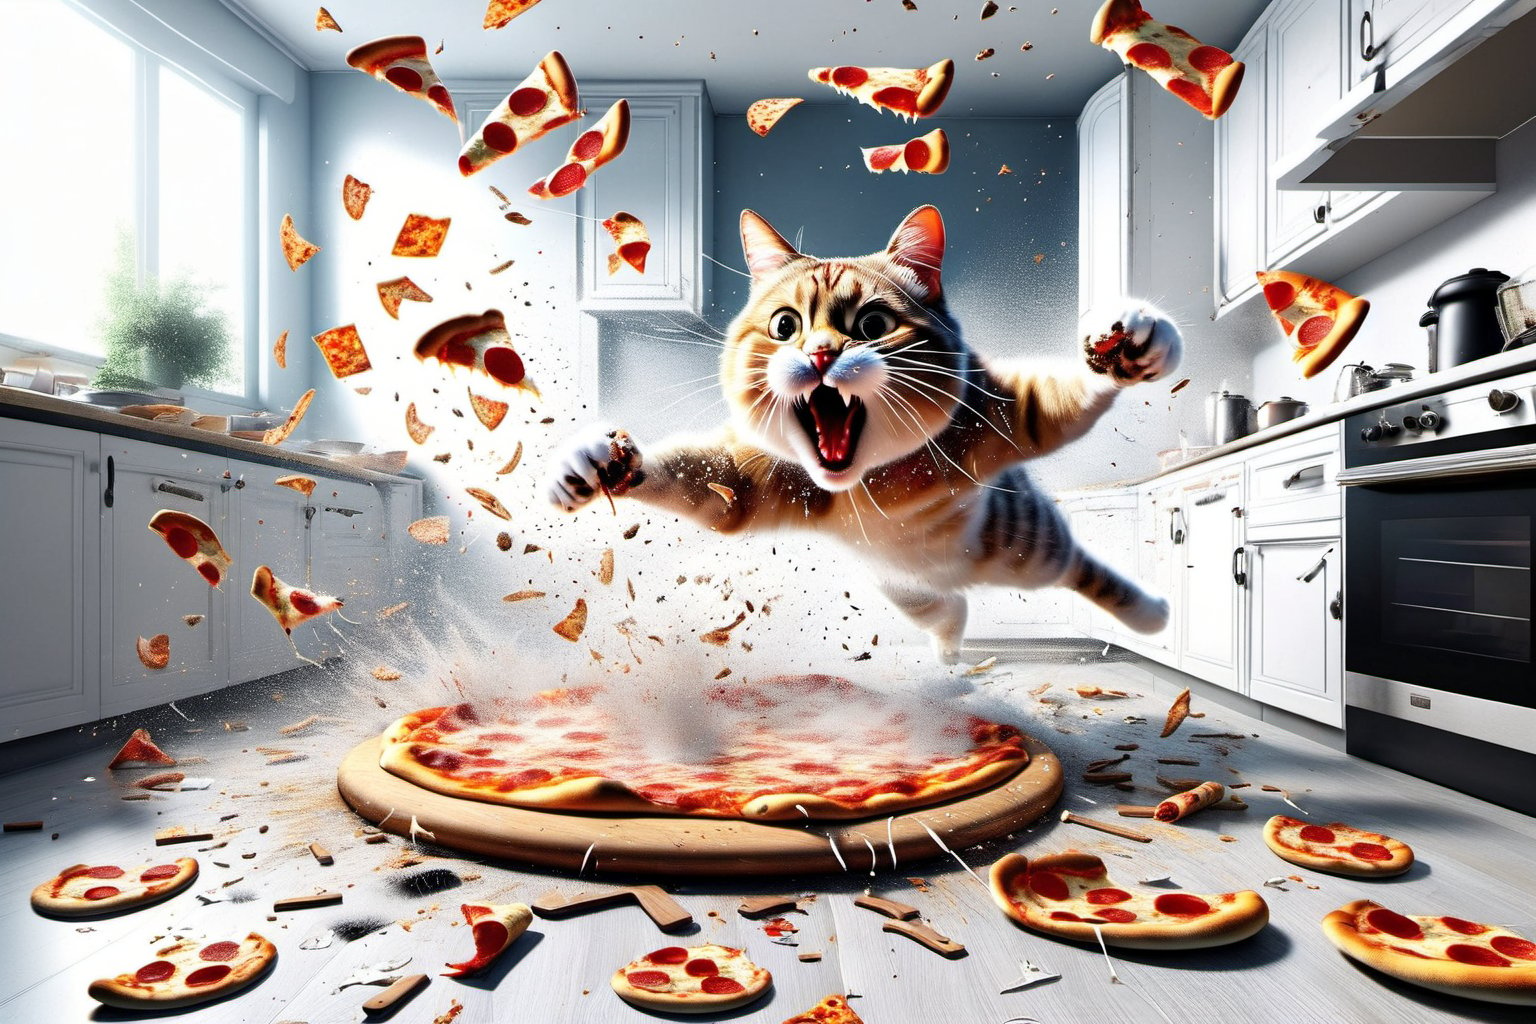 a hyper realistic picture of a cat making a mess out of the kitchen, pizza flying everywhere